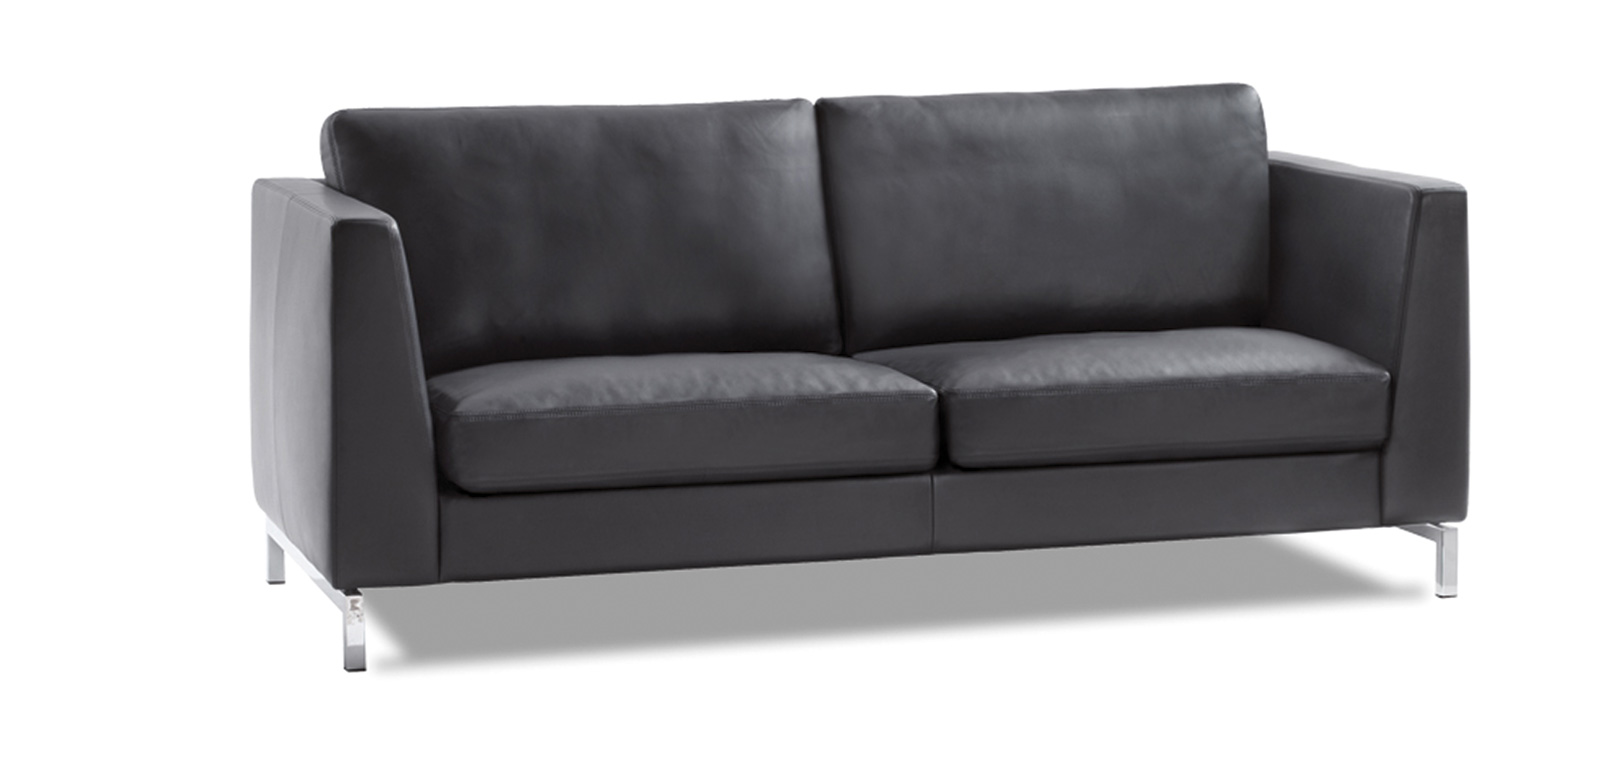 CL850 Sofa in Black Leather with Chrome Feet